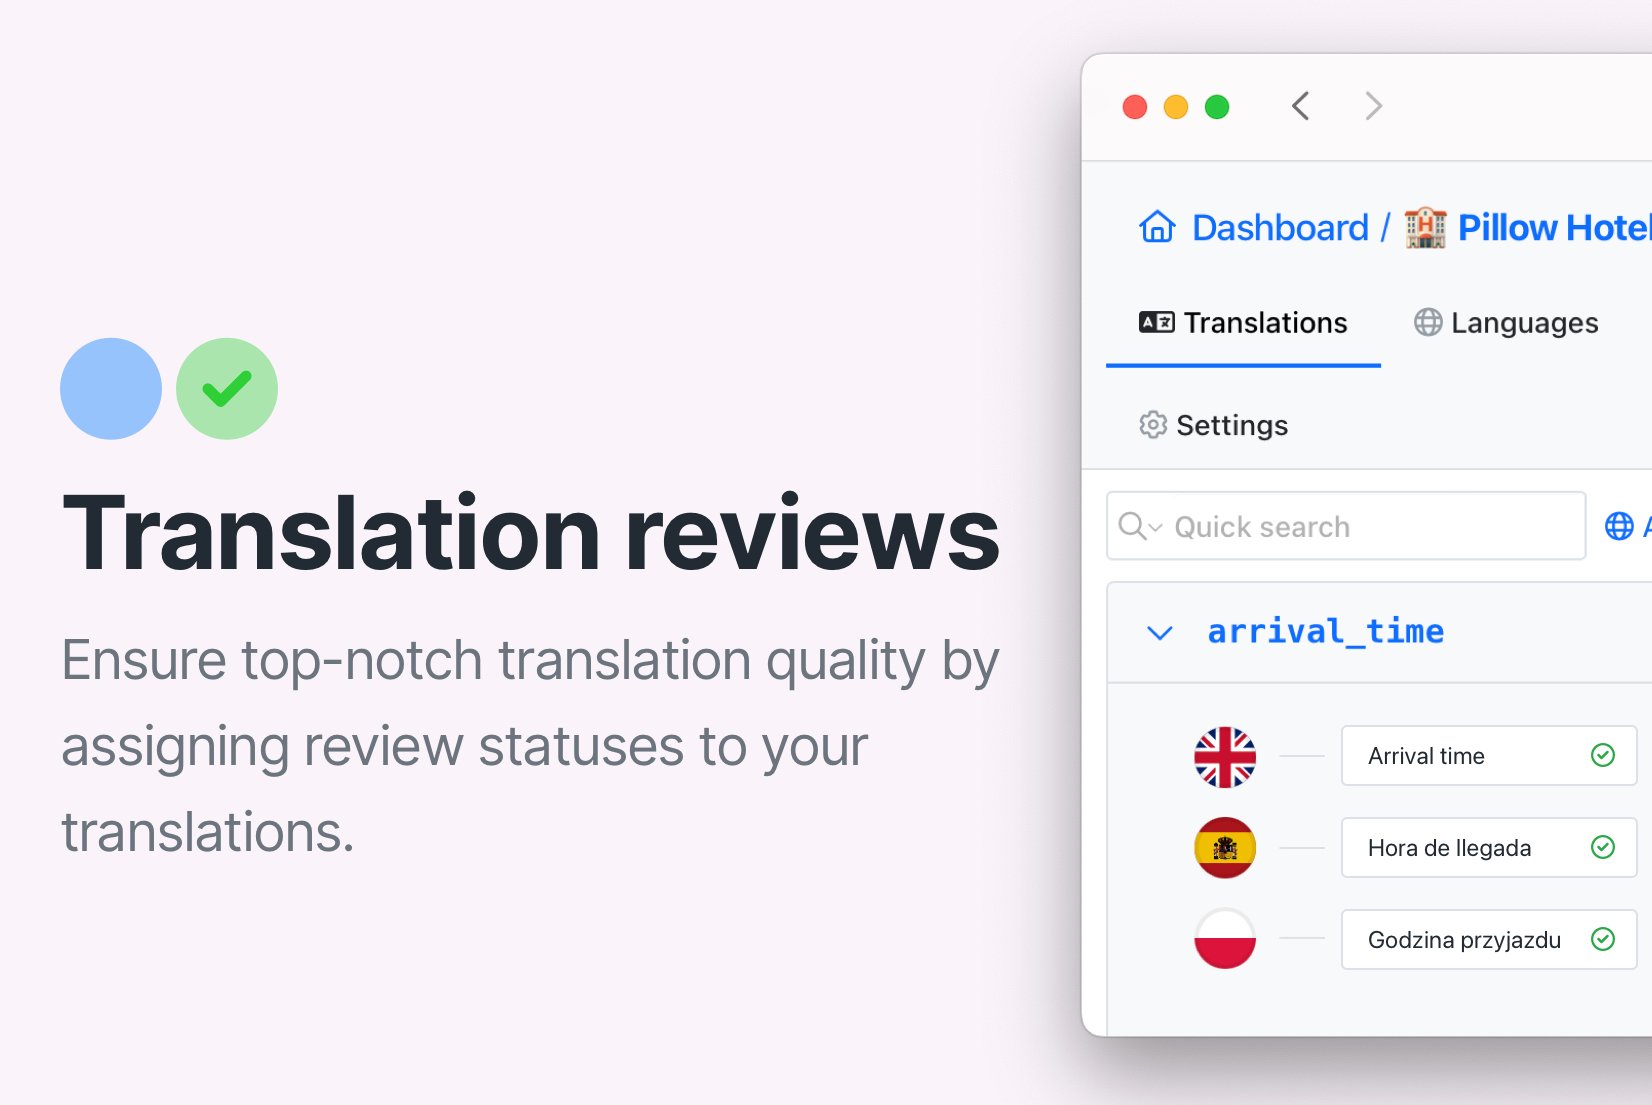 How to control translation quality with review statuses